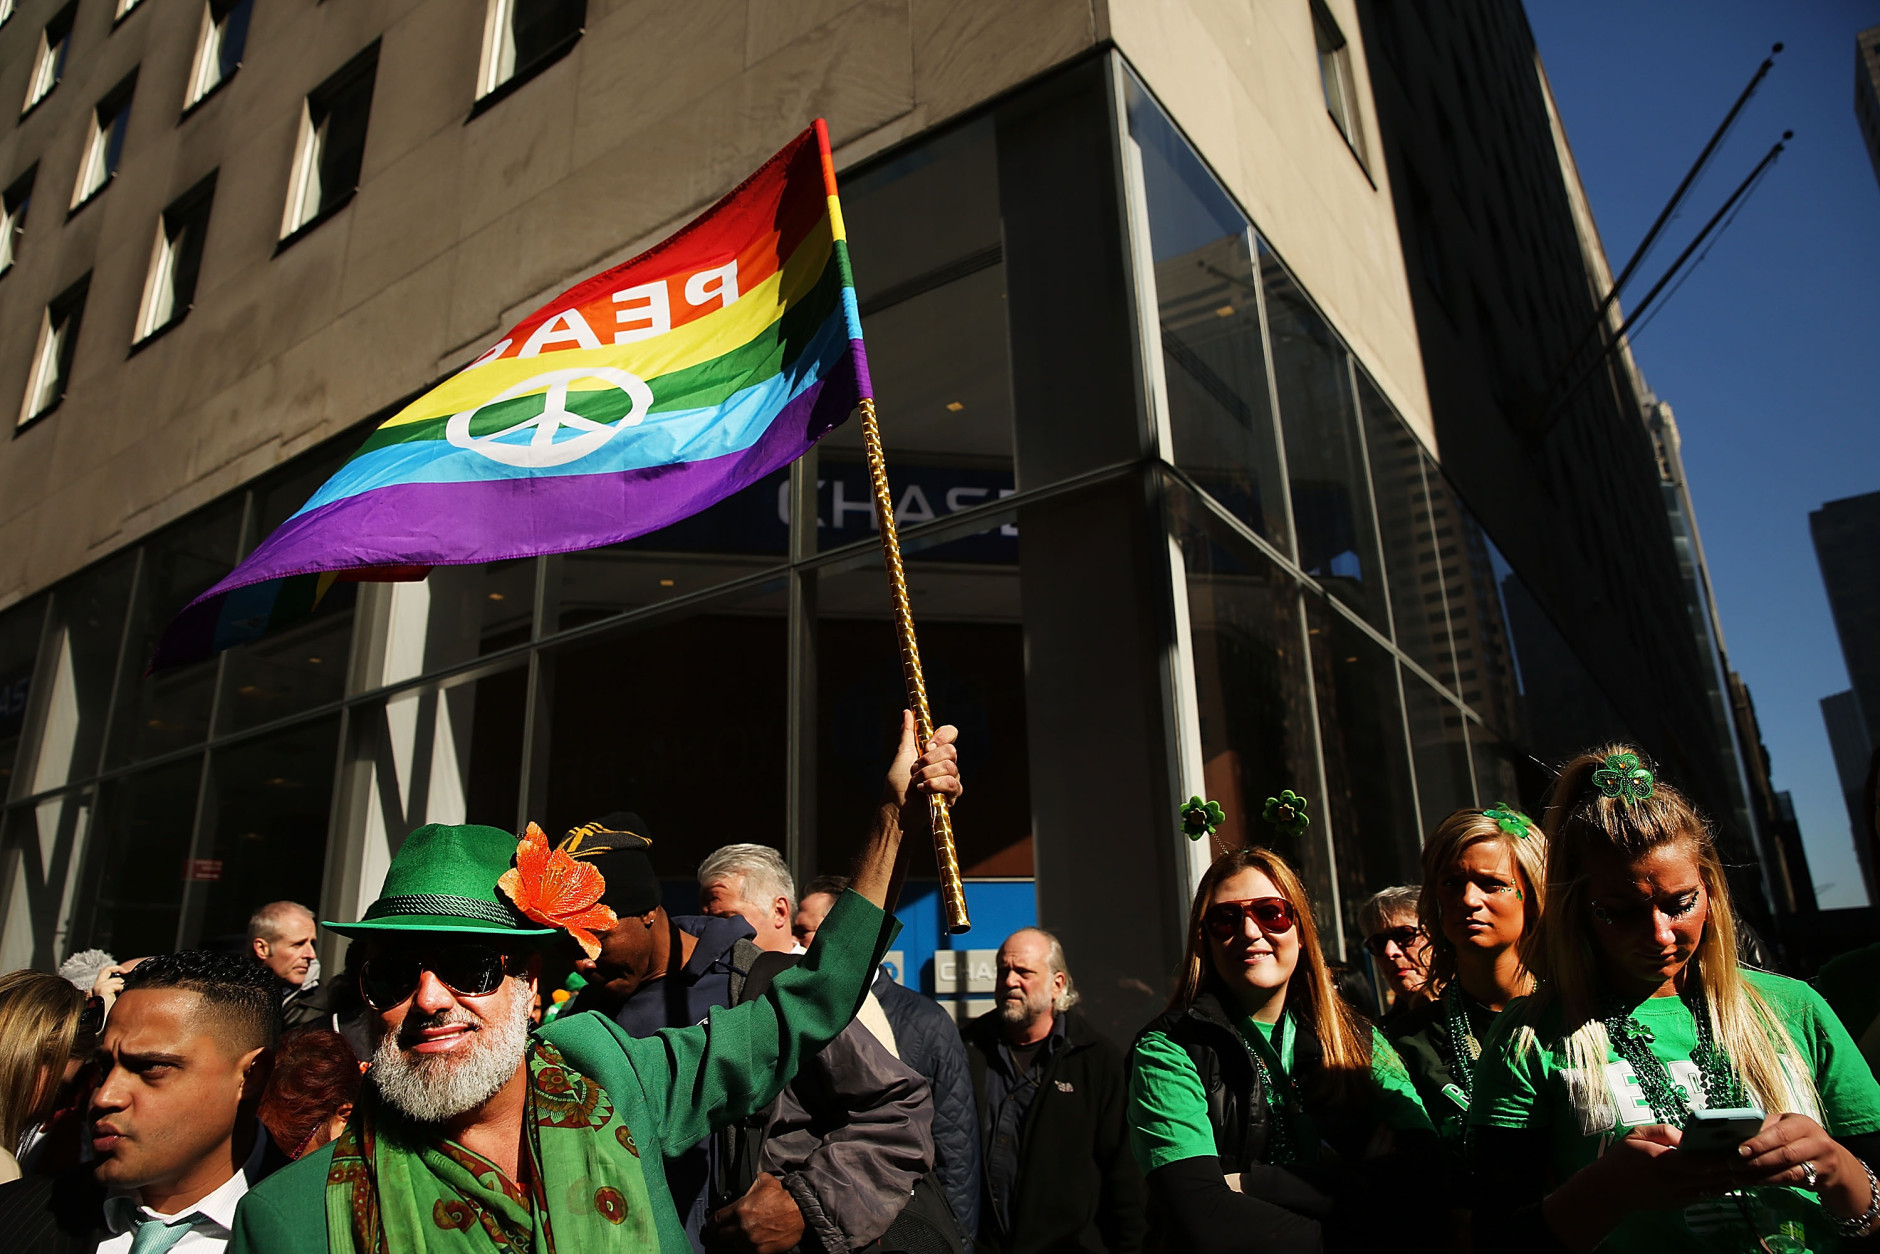 NEW YORK, NY - MARCH 17:  A man holds up a Gay Pride flag at the annual St. Patrick's Day parade, one of the largest and oldest in the world on March 17, 2016 in New York City. Now that a ban on openly gay groups has been dropped, New York Mayor Bill de Blasio is attending the parade for the first time since he became mayor in 2014. The parade goes up Fifth Avenue ending at East 79th Street and will draw an estimated 2 million spectators along its 35-block stretch.  (Photo by Spencer Platt/Getty Images)